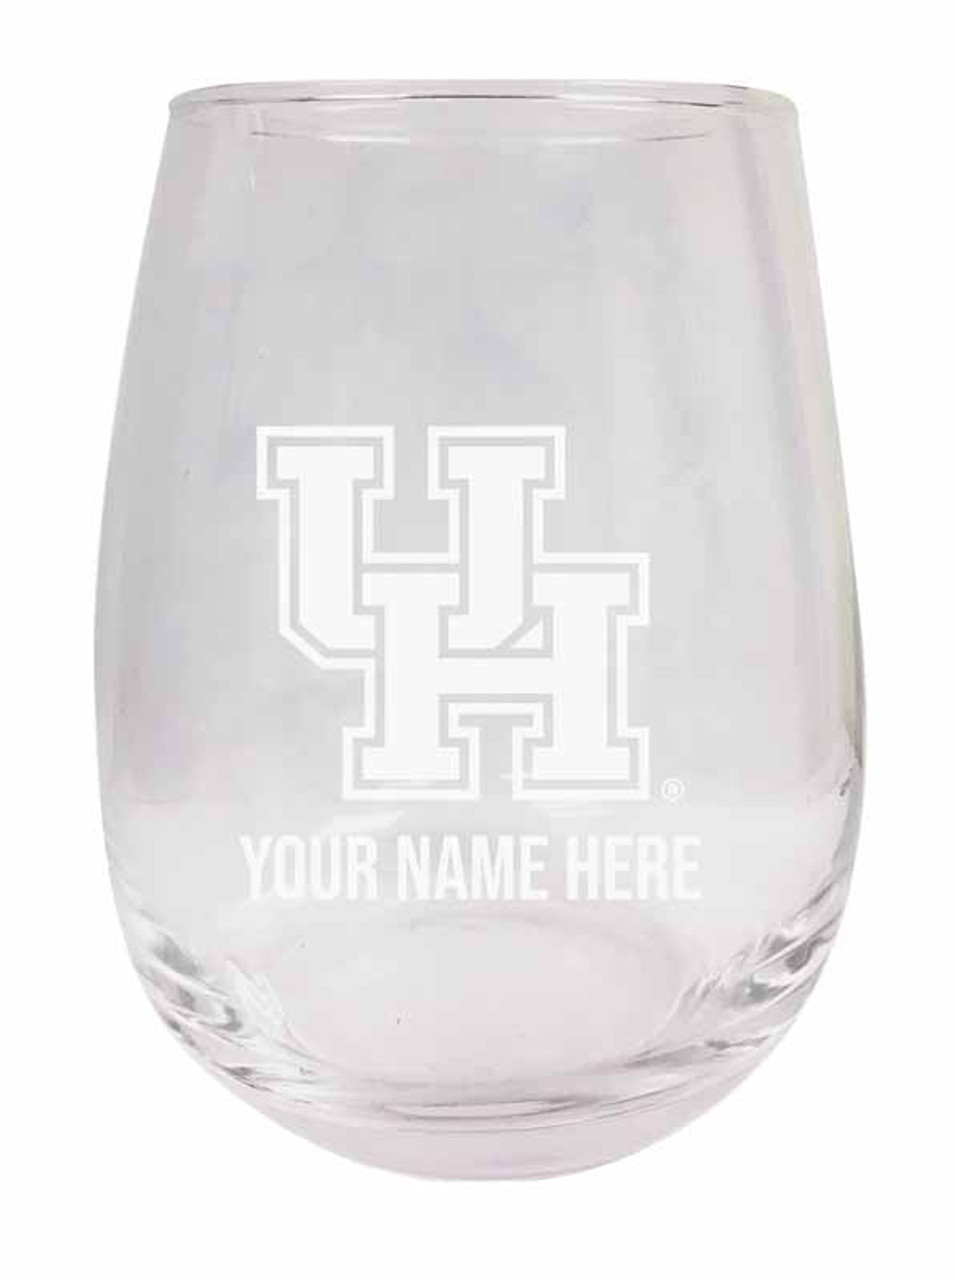 Personalized Customizable University of Houston Etched Stemless Wine Glass 9 oz With Custom Name